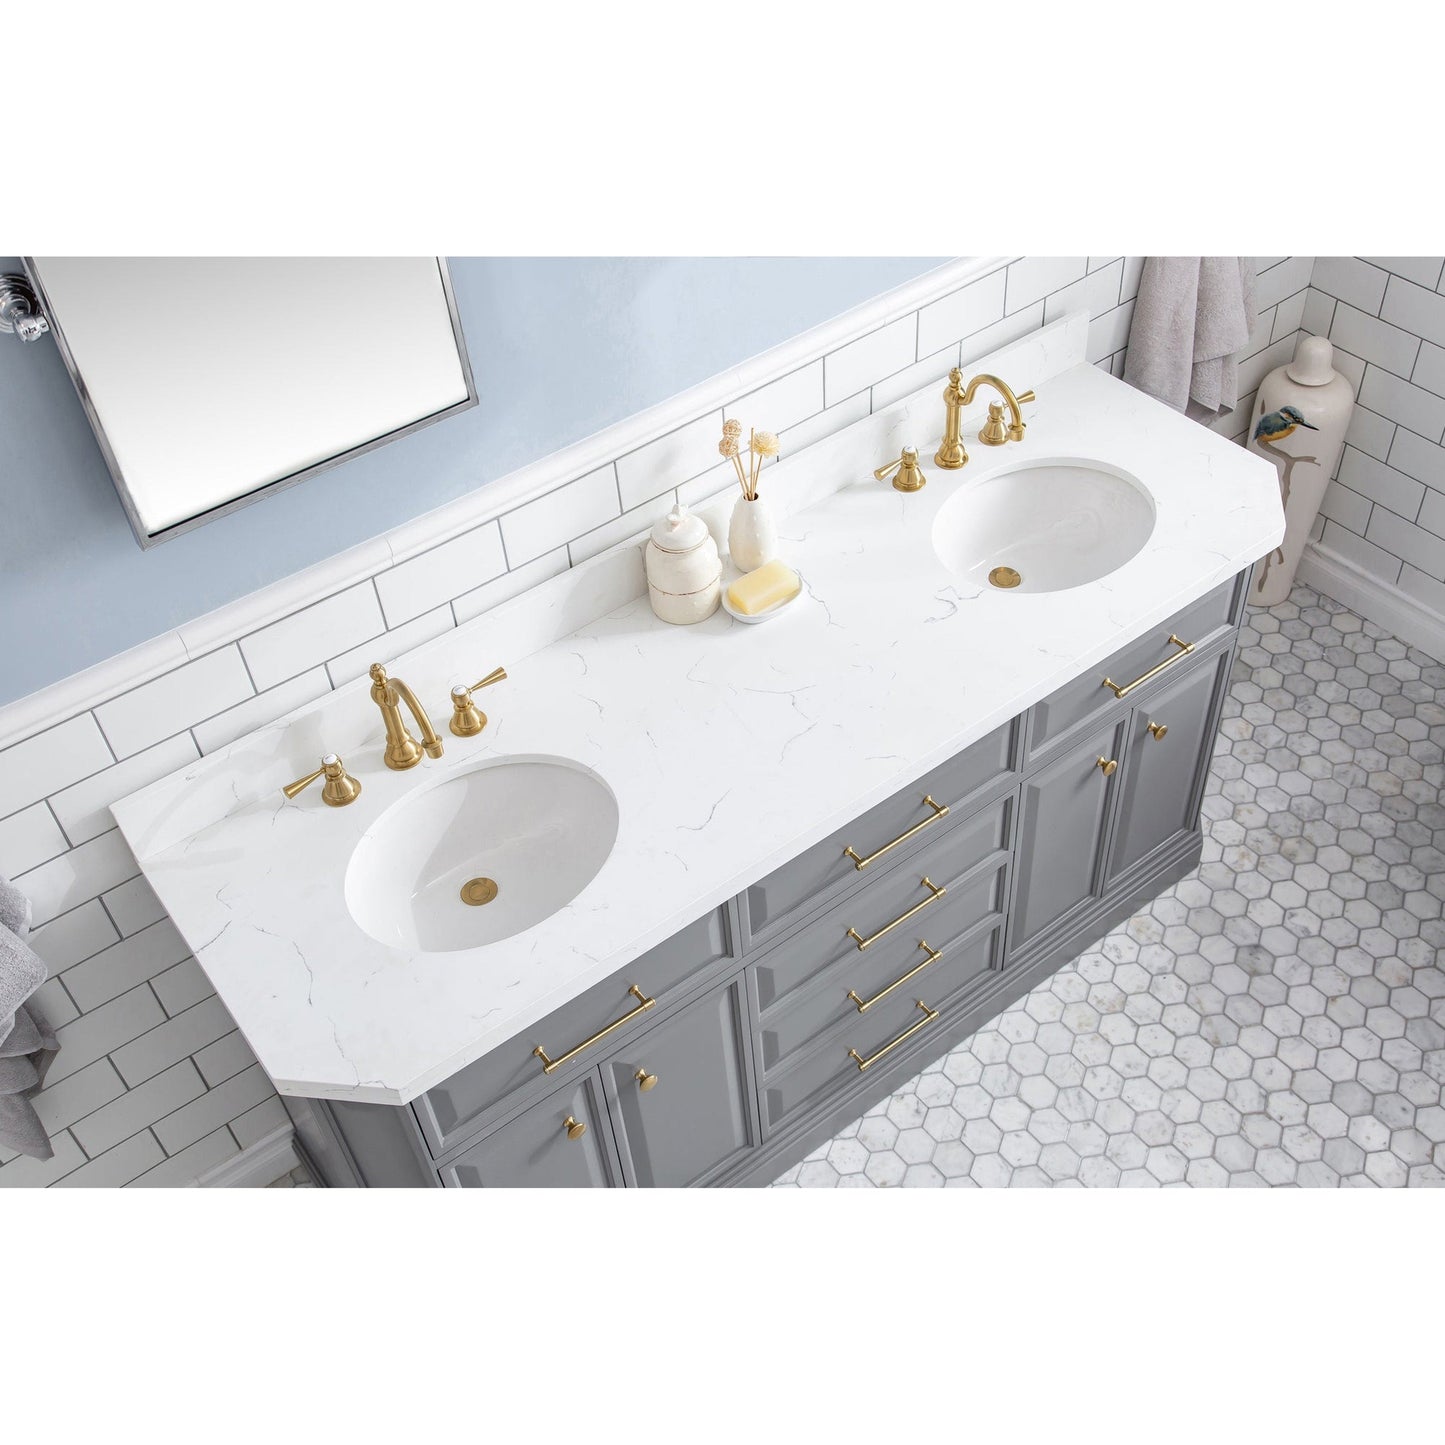 Water Creation Palace 72" Quartz Carrara Cashmere Grey Bathroom Vanity Set With Hardware And F2-0012 Faucets in Satin Gold Finish And Mirrors in Chrome Finish